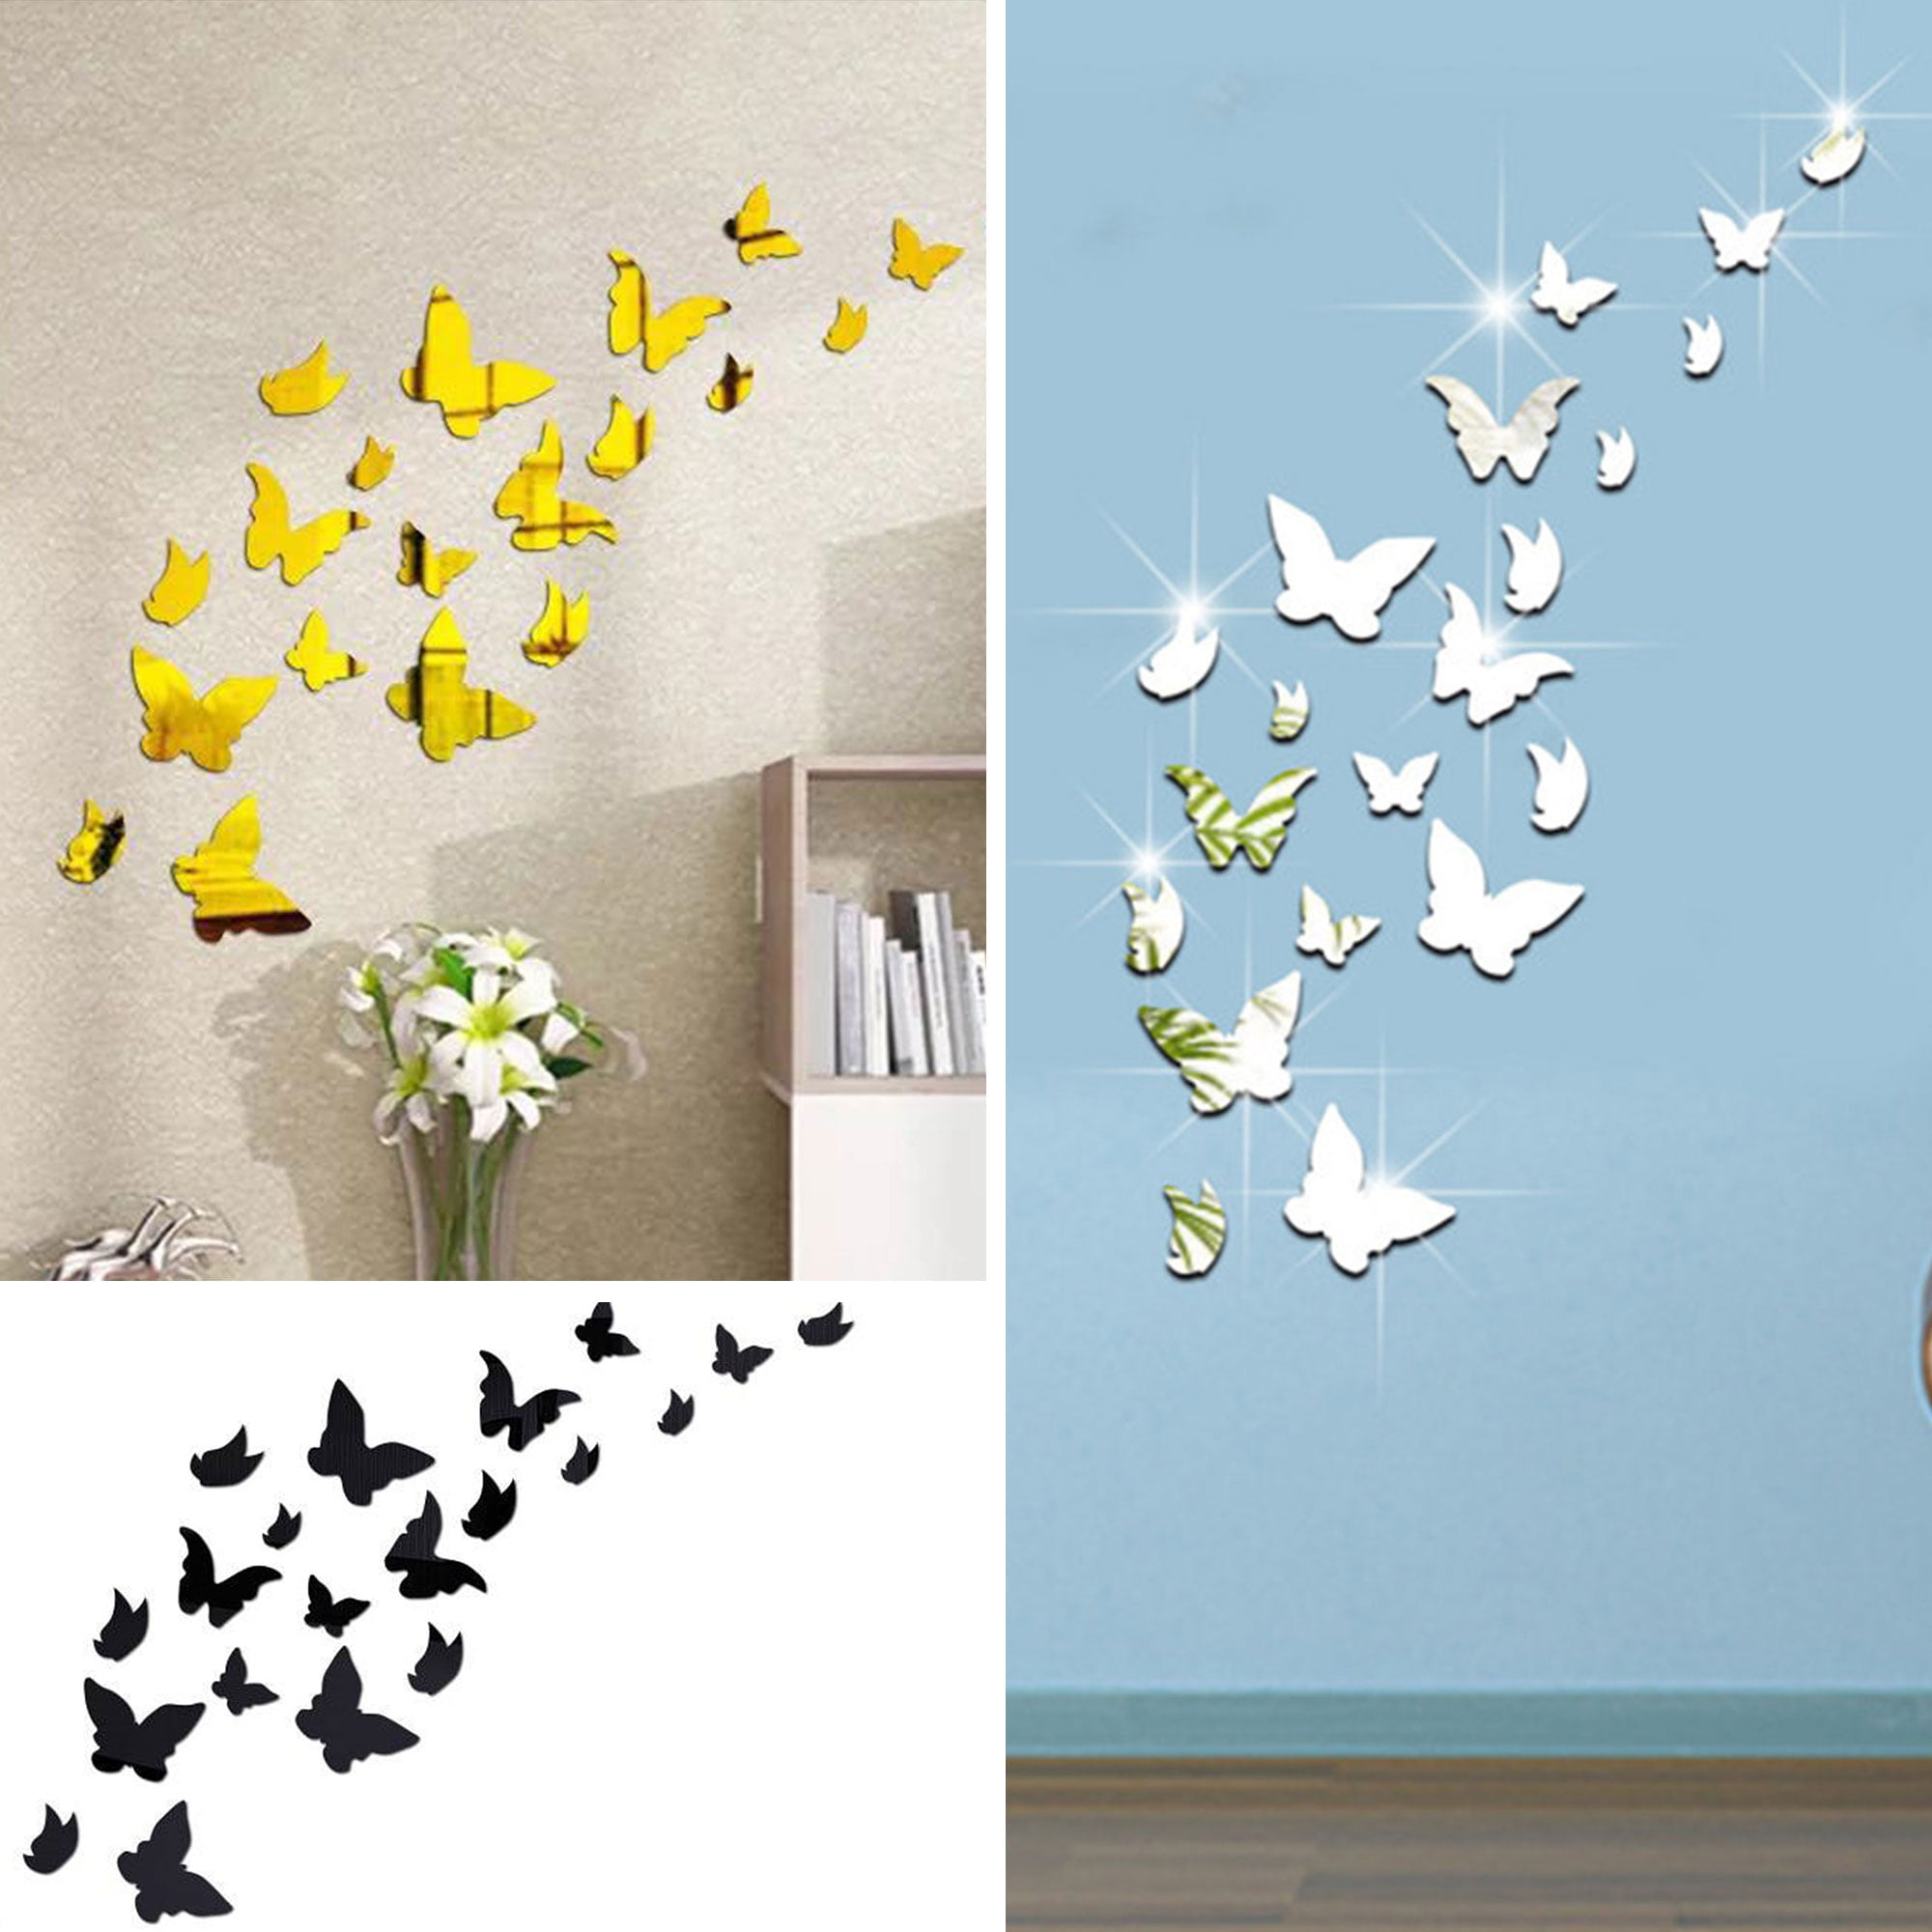 DIY Removable Home 3D Mirror Wall Stickers Decal Art Vinyl Room Decor Butterfly